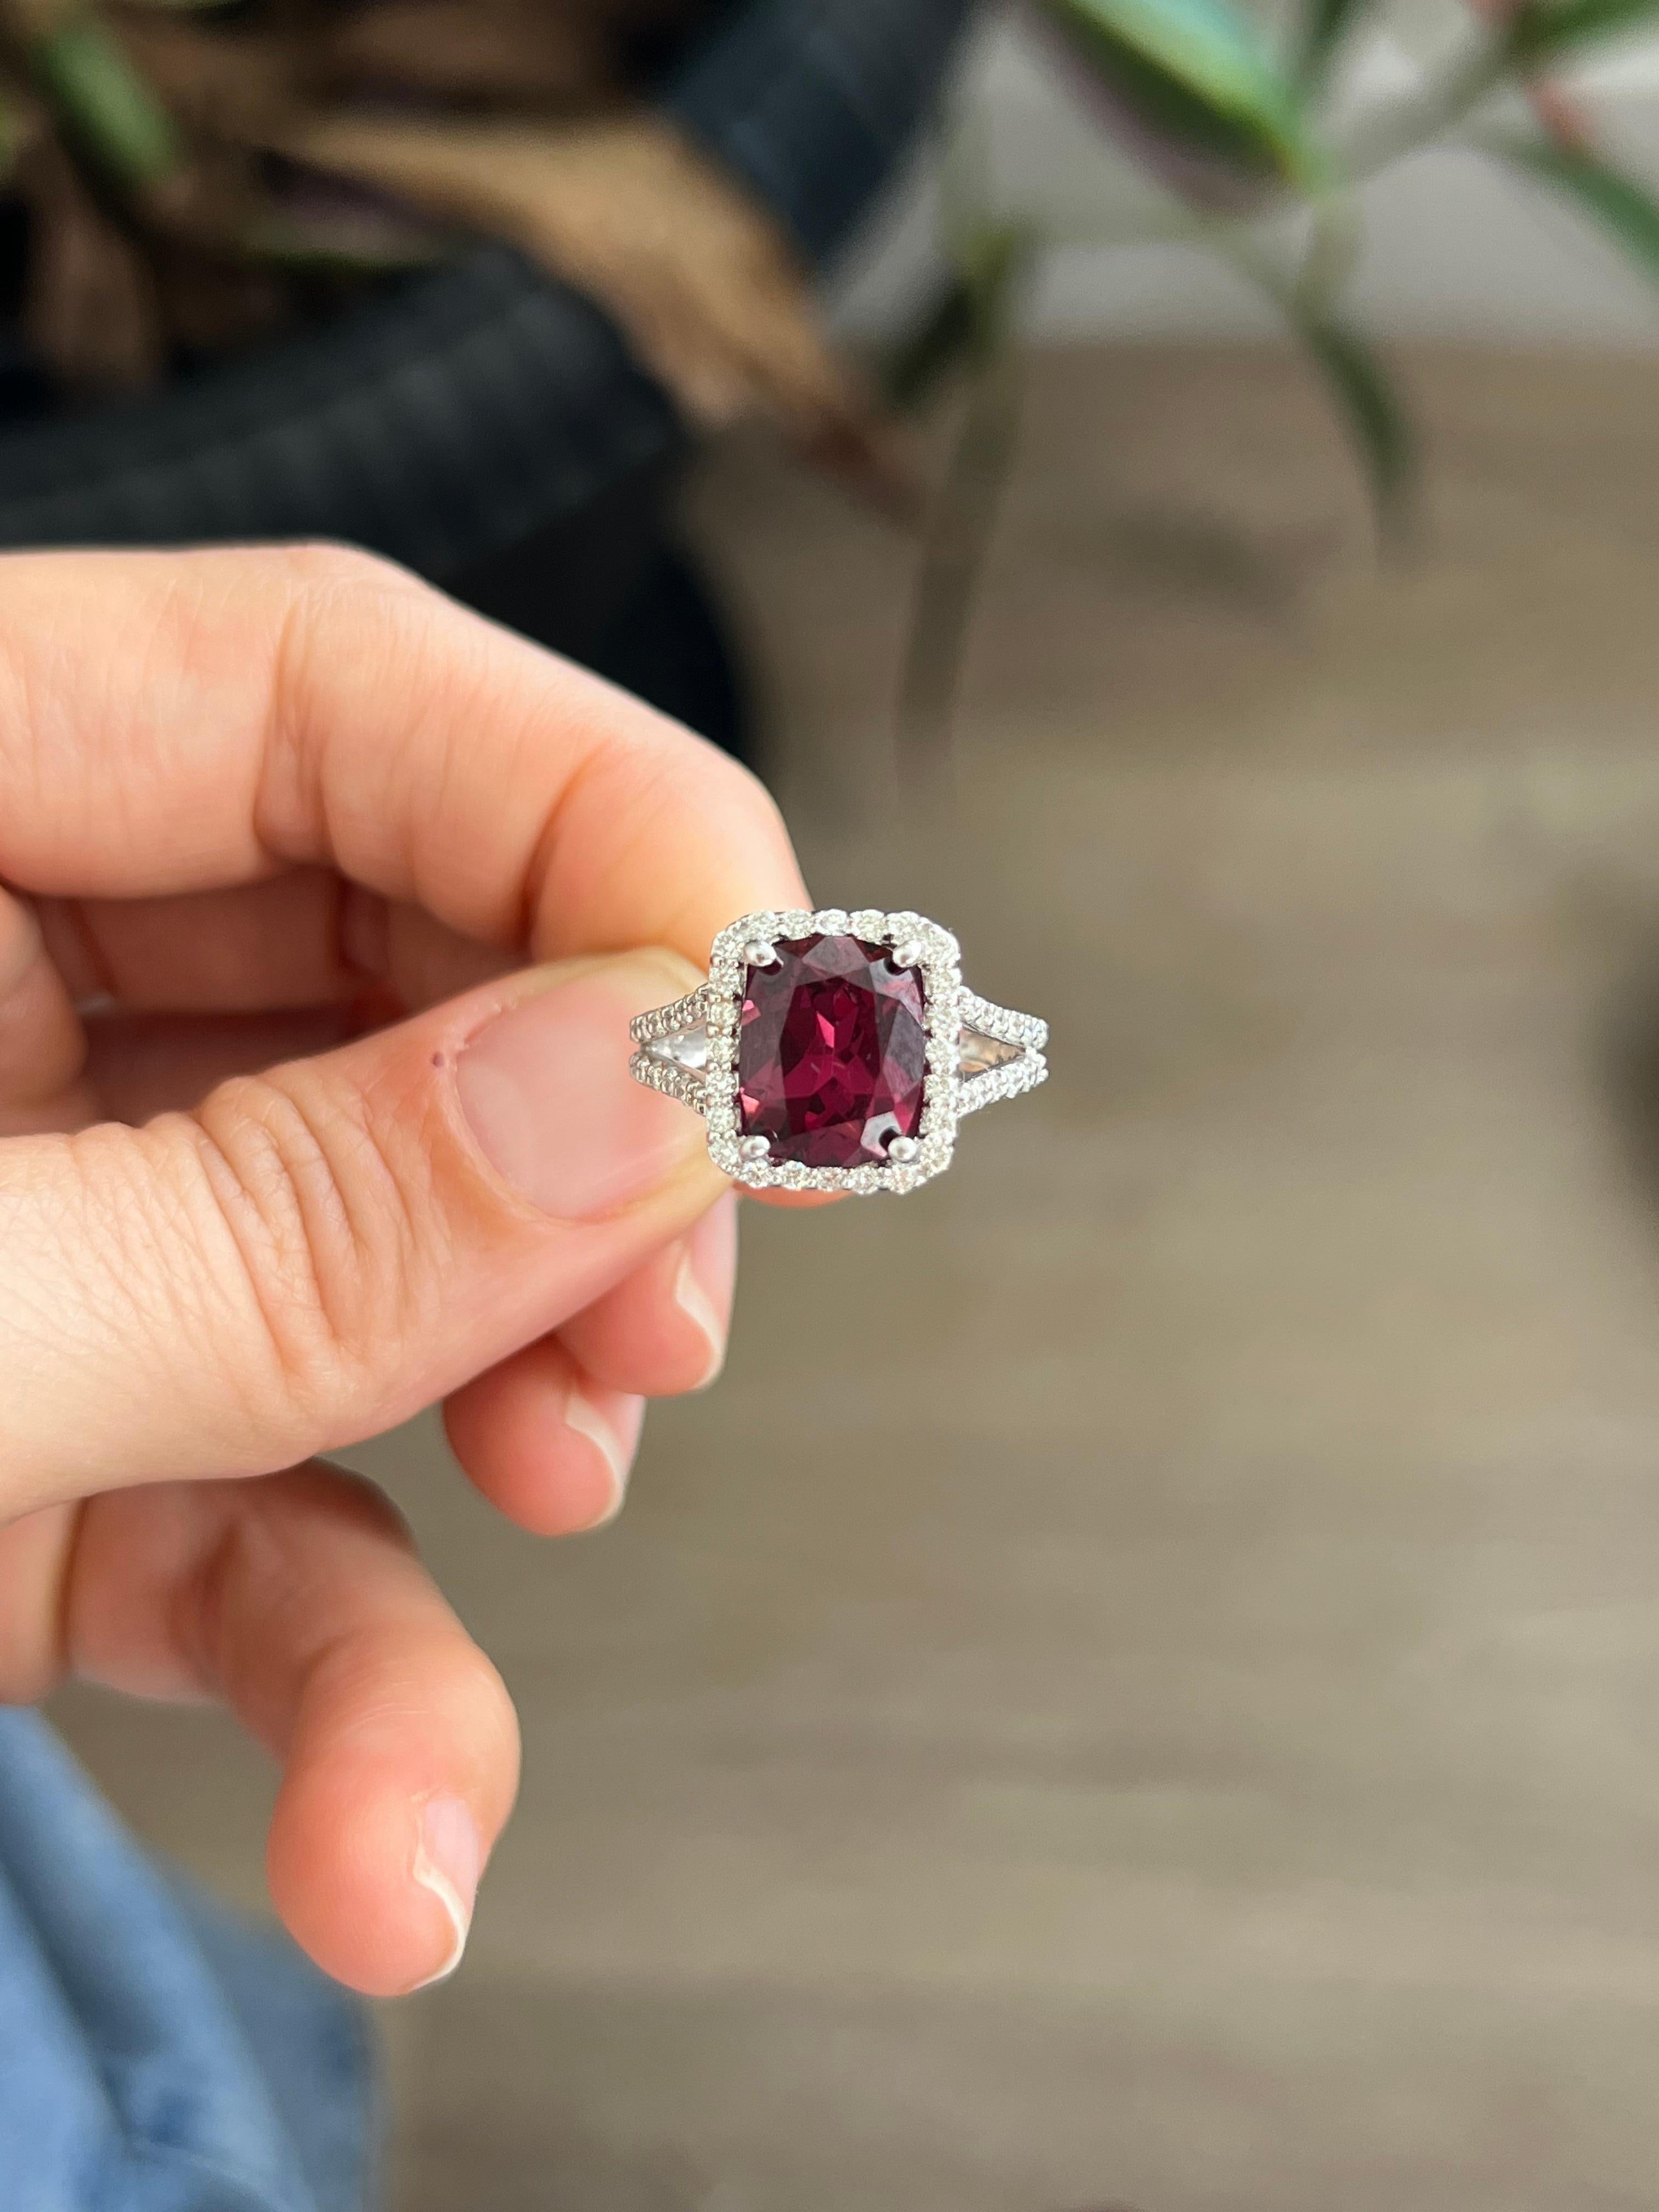 14K white gold and diamond ring with rhodolite garnet center stone.

Rhodolite garnets offer a brilliant and vibrantly colored combination of pink and purple hues that make them perfect for everyday wear. Their beauty and brilliance come from their